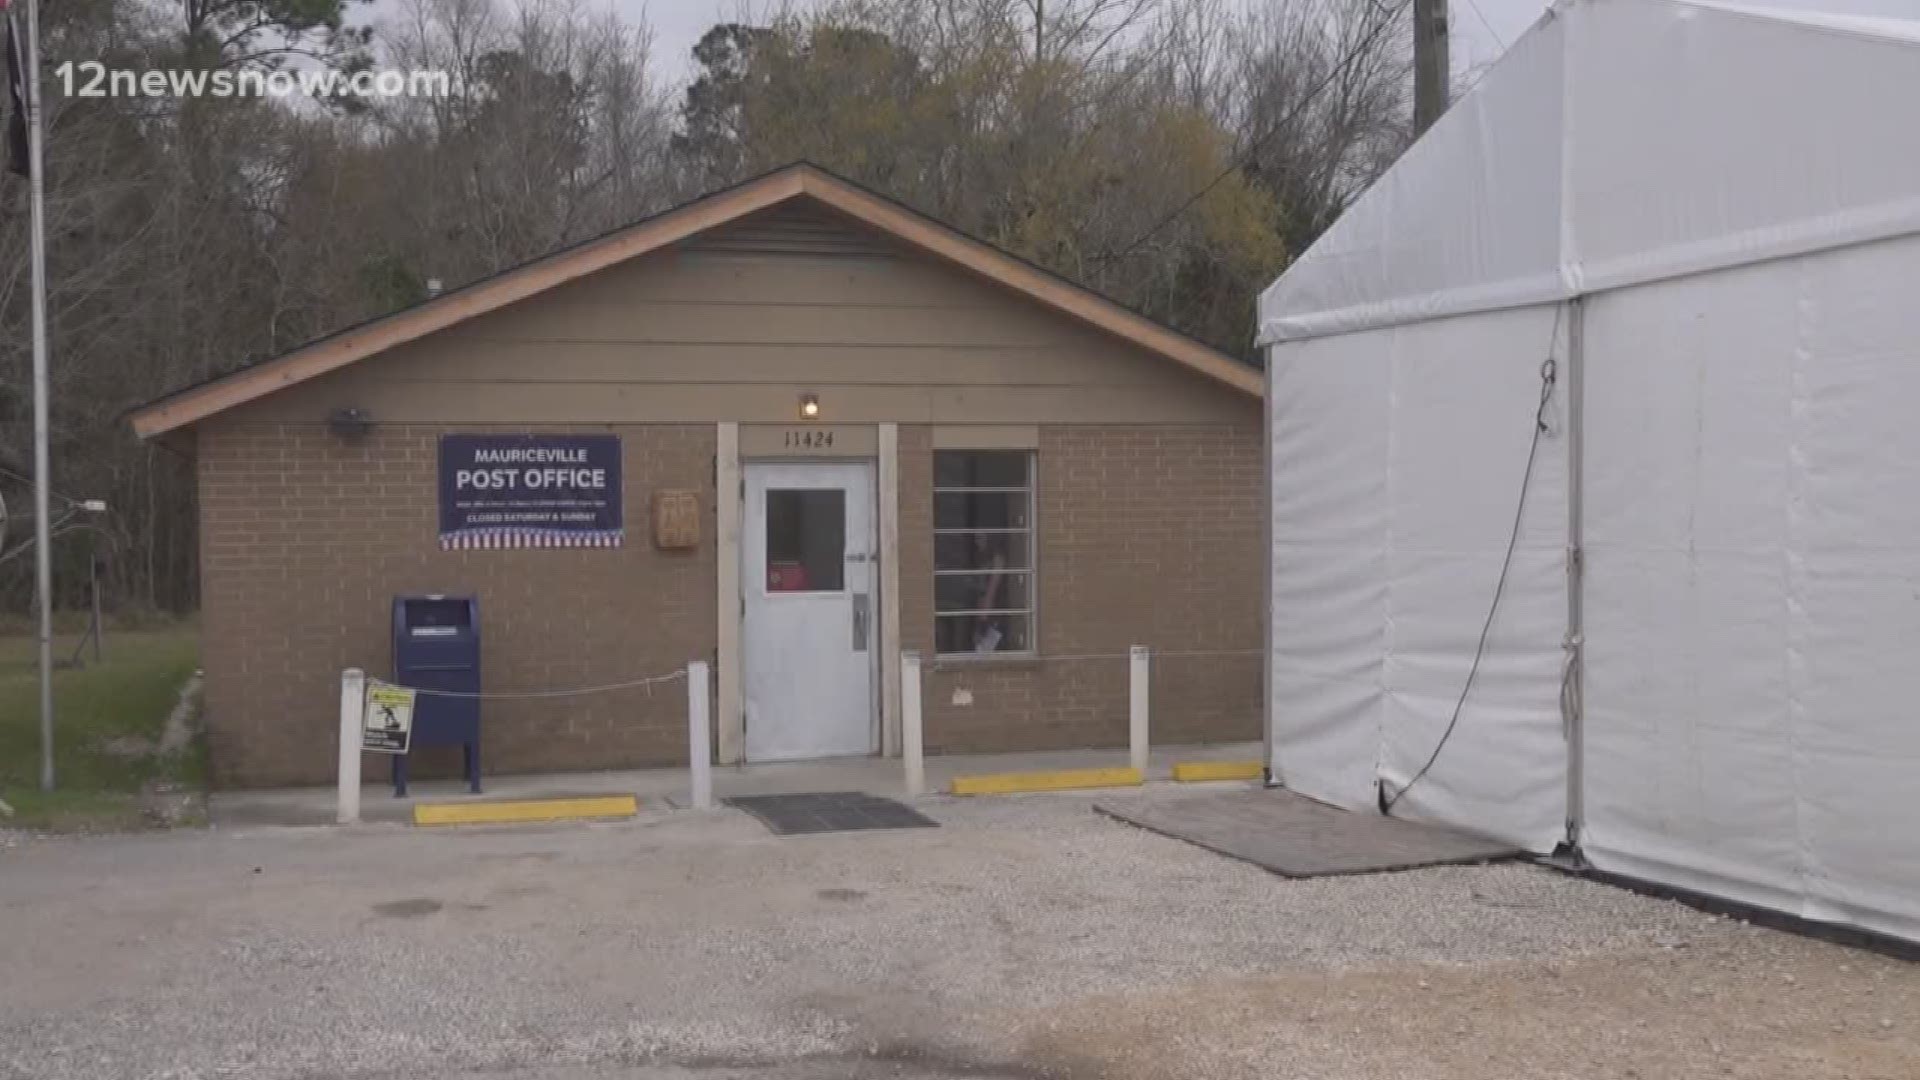 Those in Mauriceville are excited to have the post office back open after staff spent months operating out of a tent